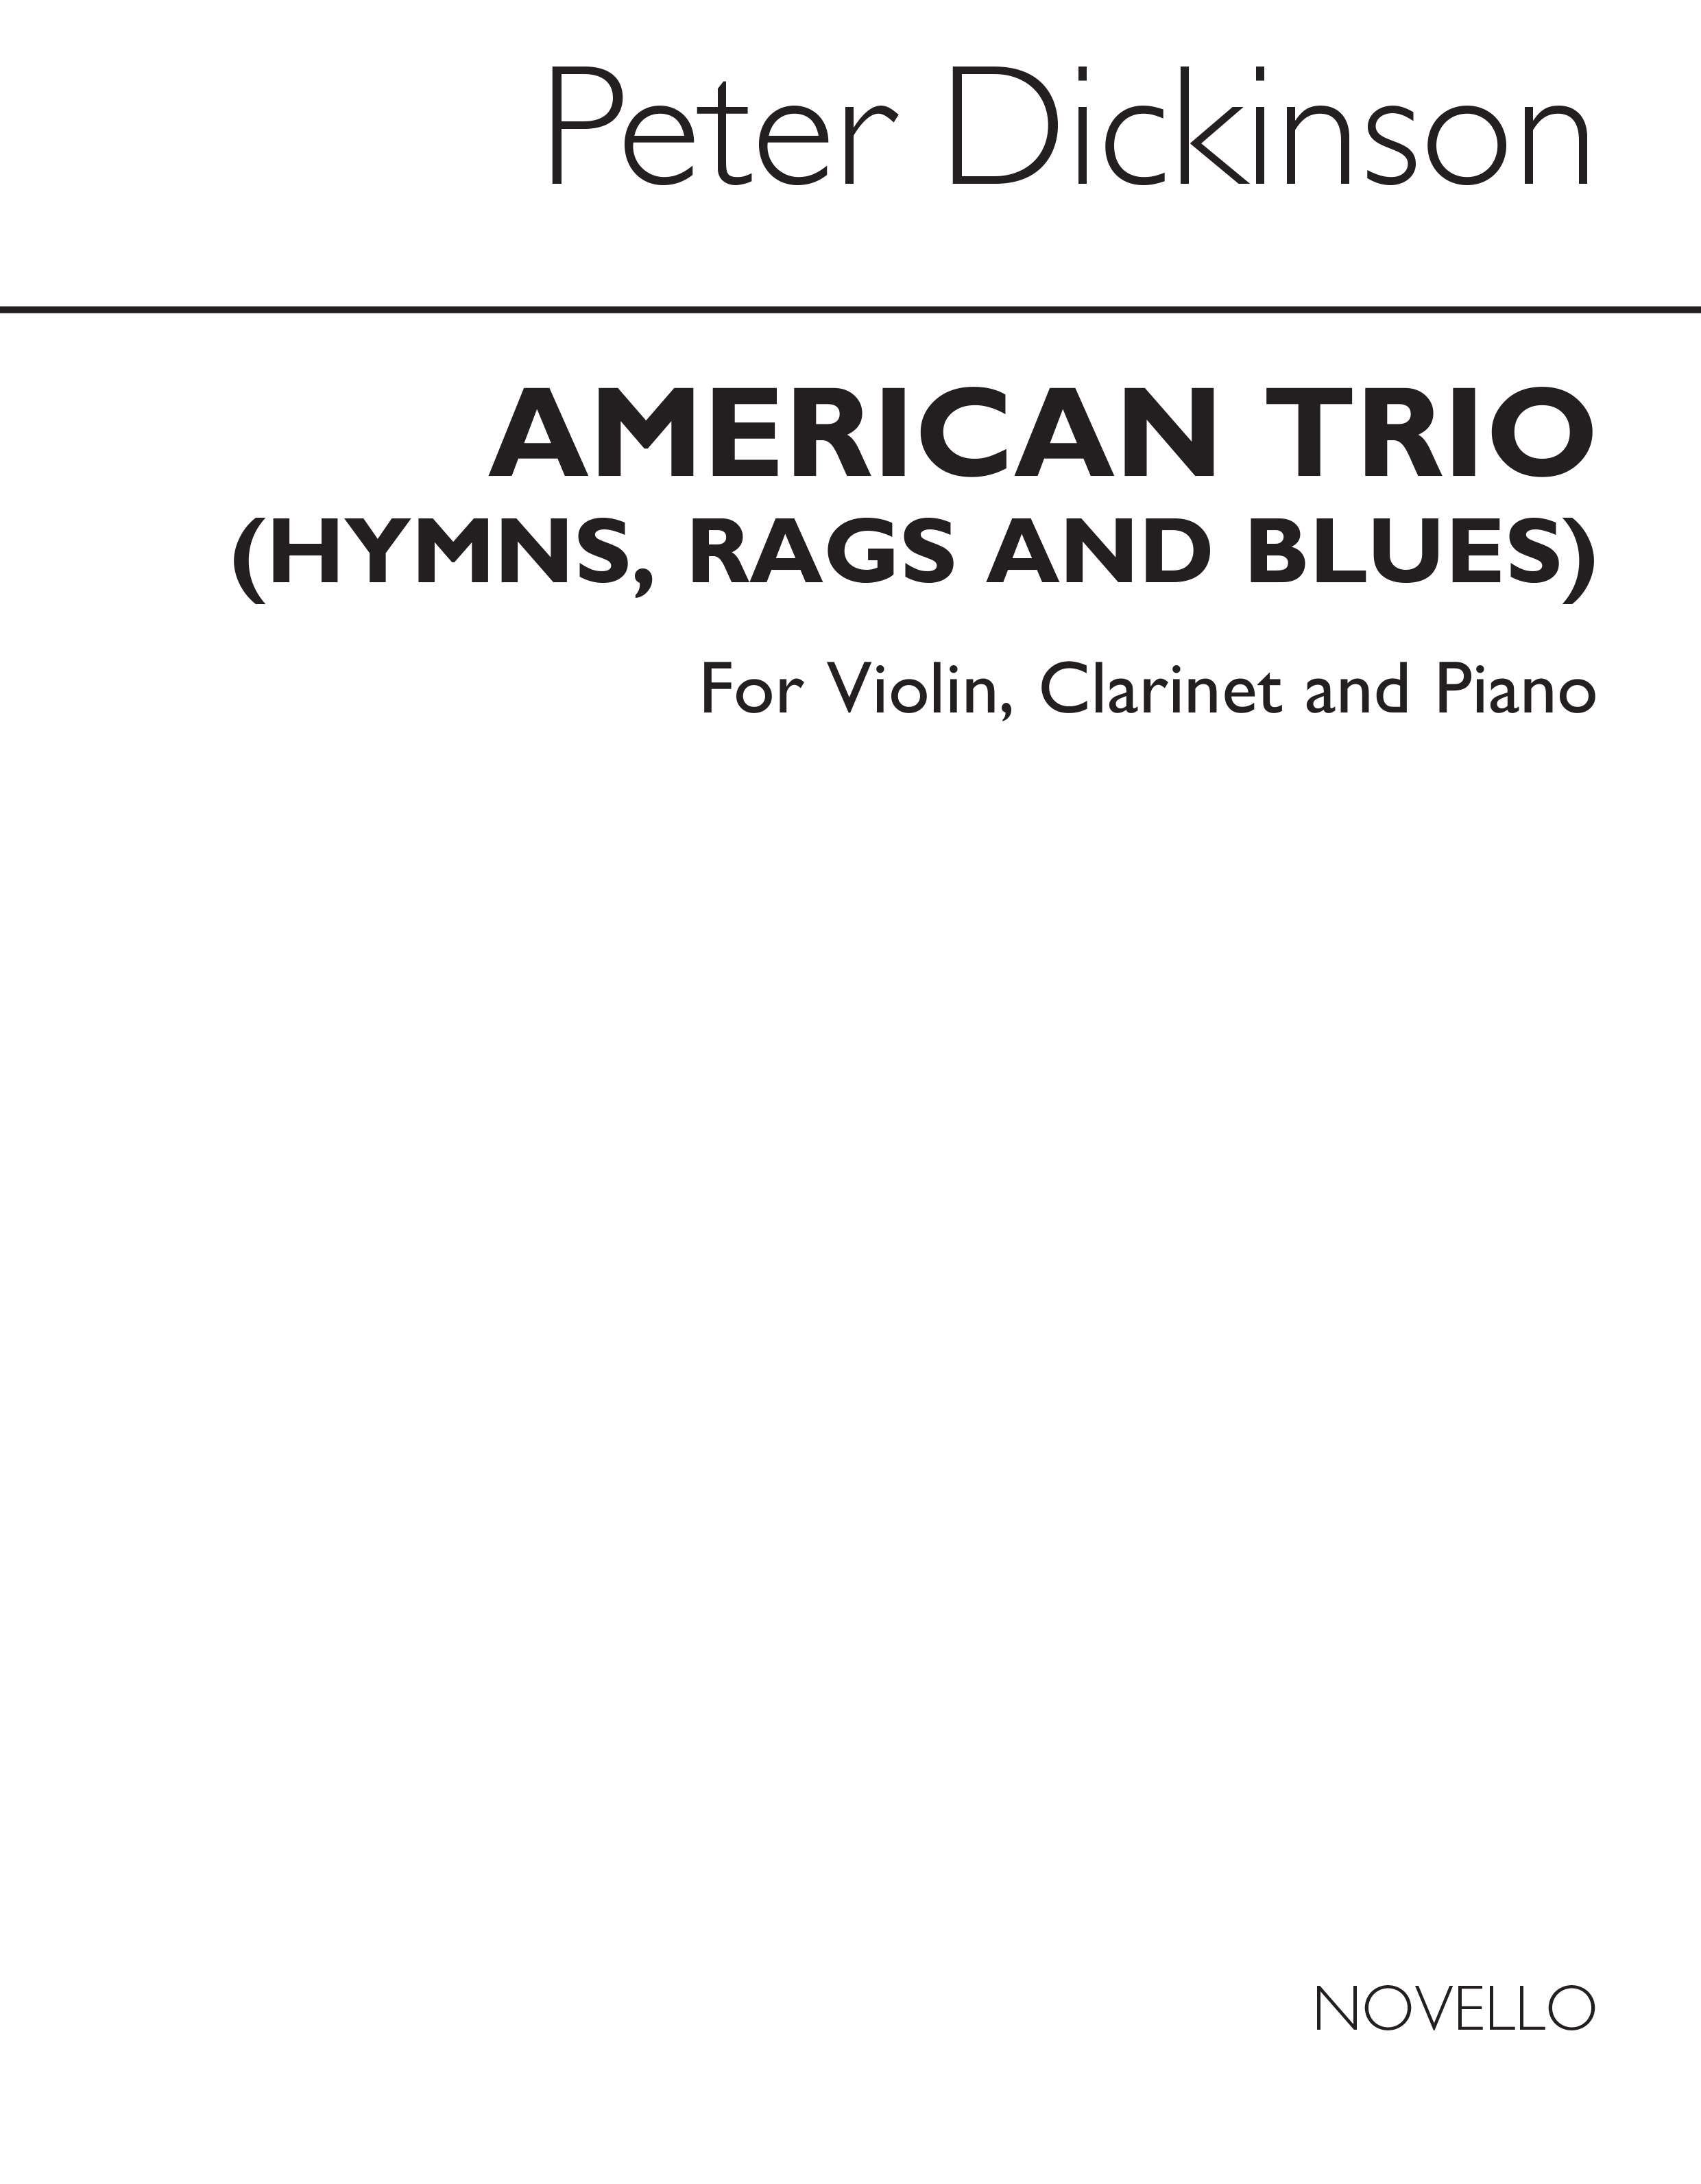 Peter Dickinson: American Trio [Hymns, Rags And Blues] (Score/Parts)